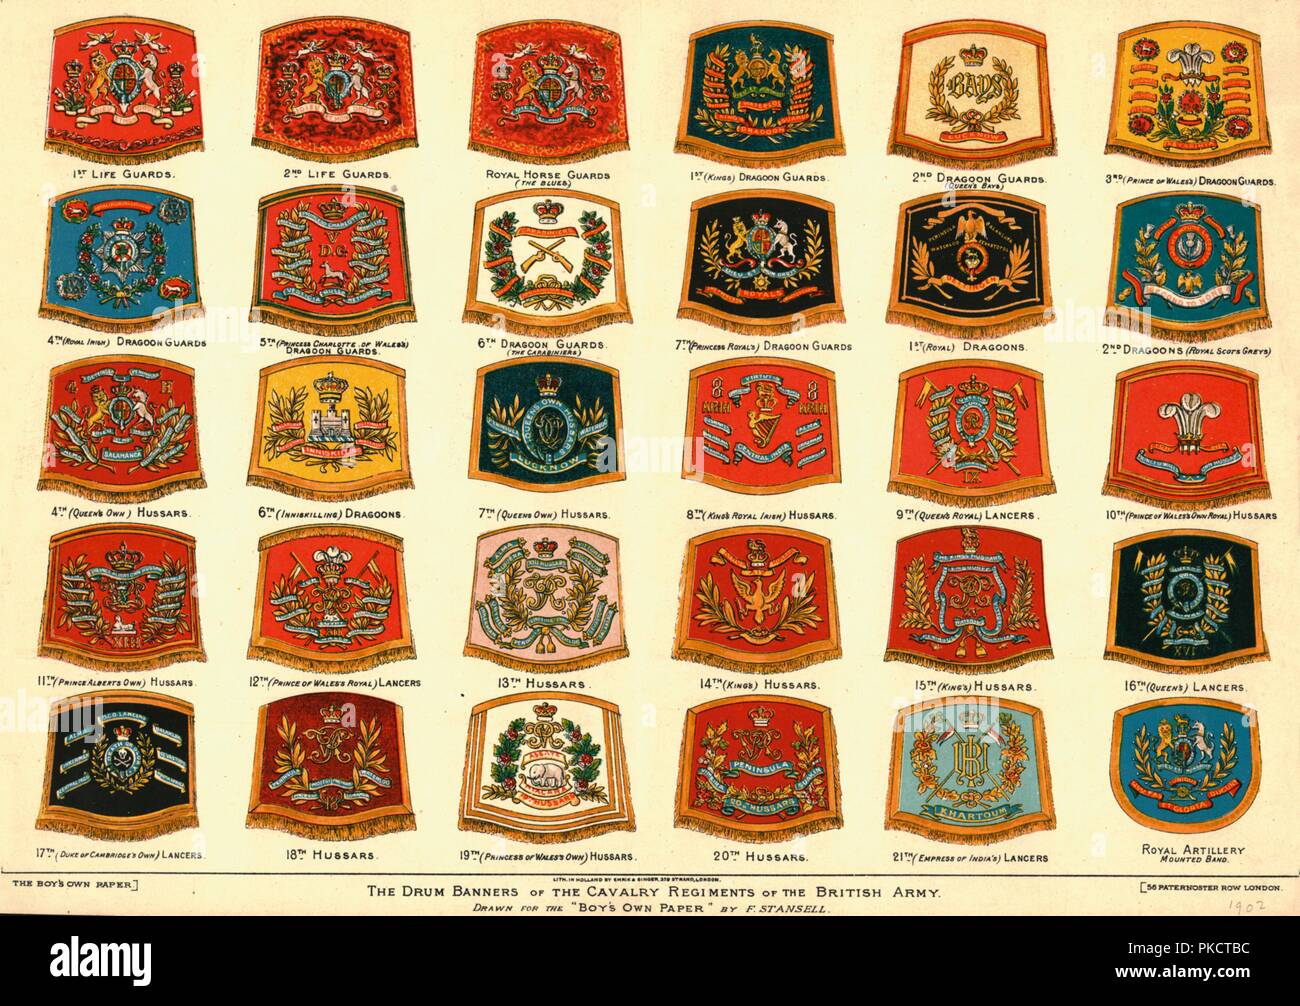 'The Drum Banners of the Cavalry Regiments of the British Army', 1902 ...